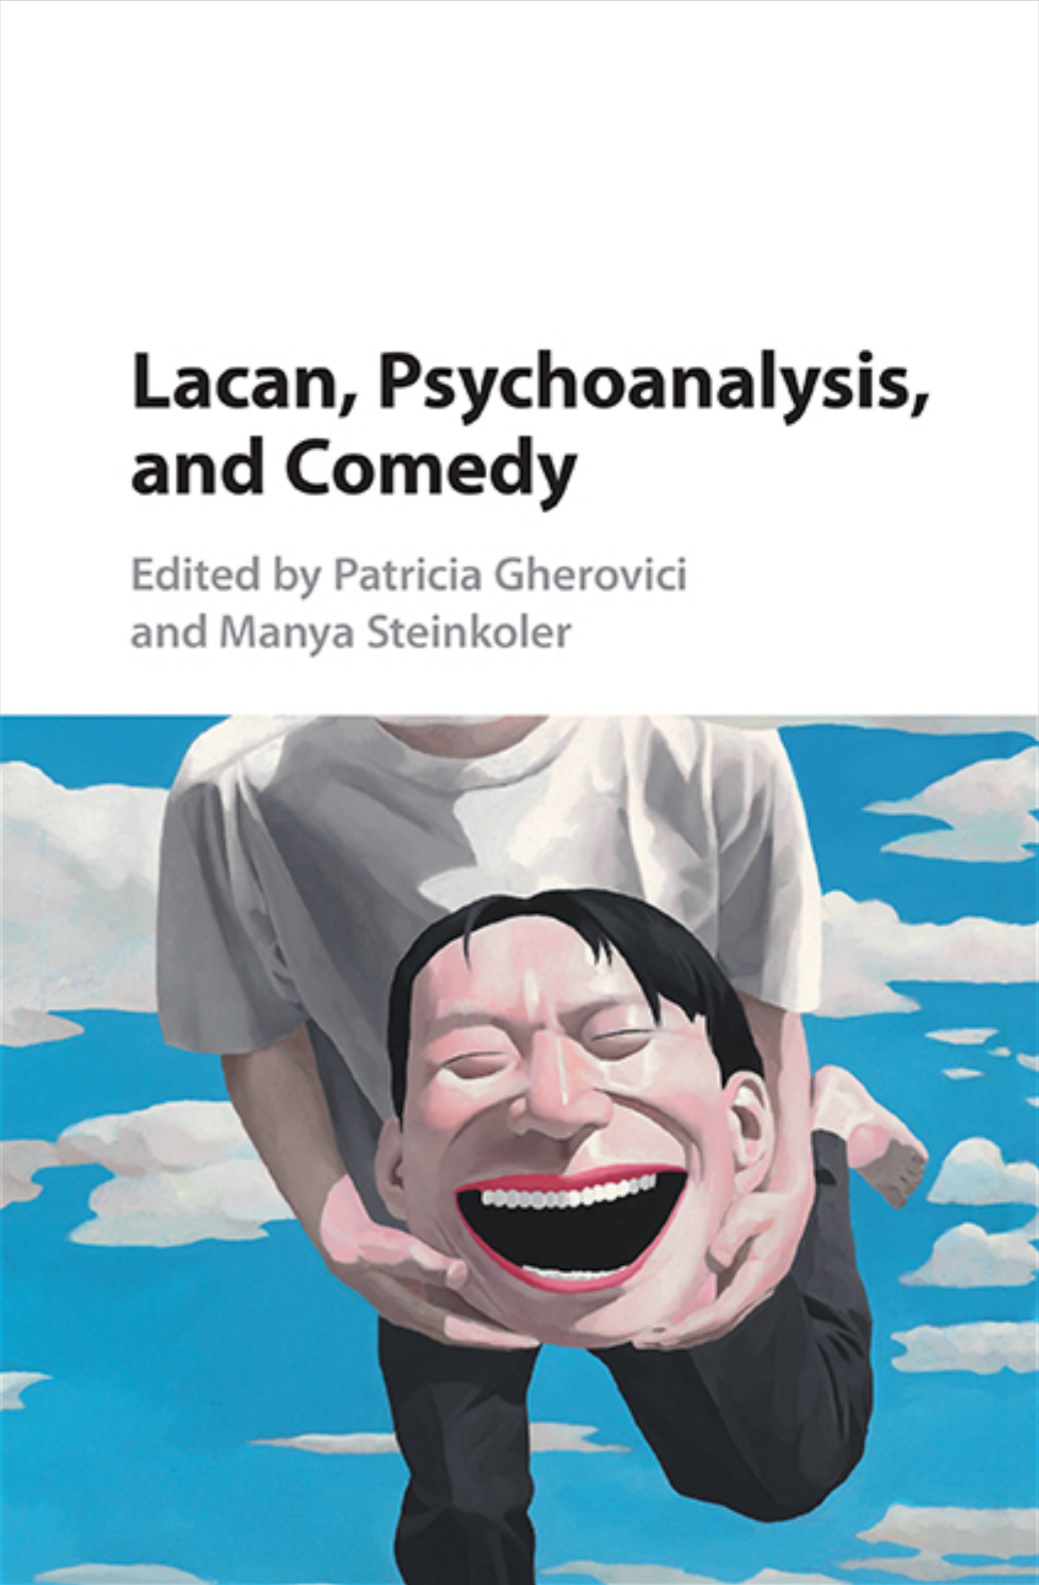 Patricia-gherovici-lacan-psychoanalysis-and-comedy-theoryleaks.jpg